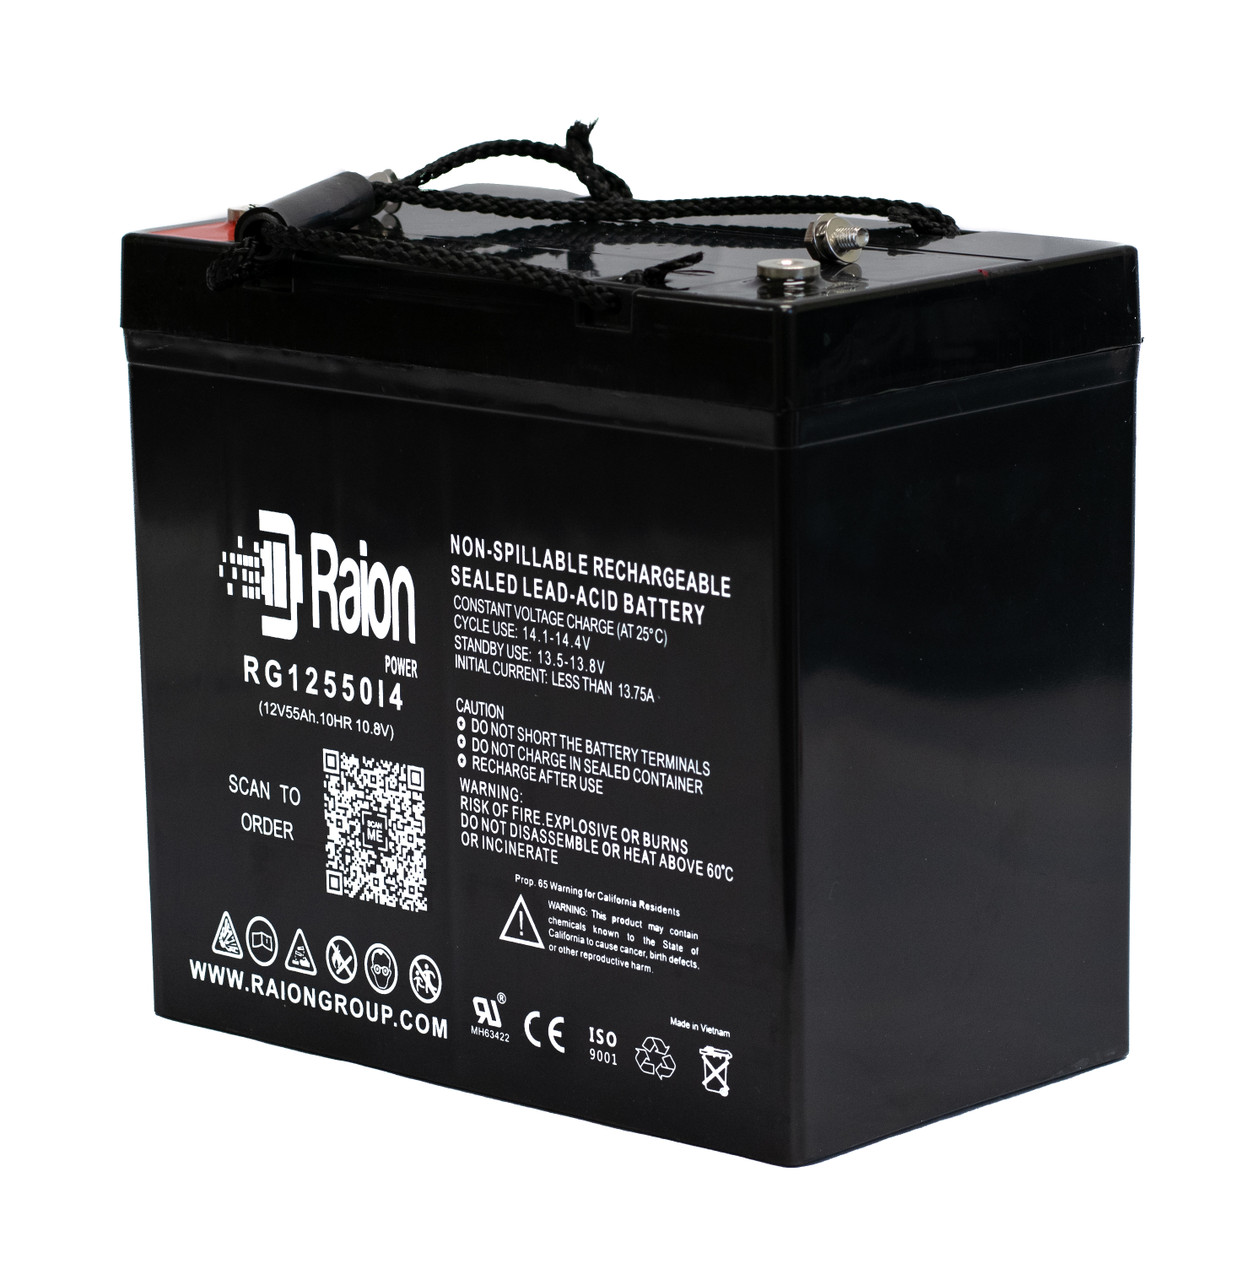 Raion Power 12V 55Ah 22NF Mobility Scooter Battery Replacement for Golden Technology Avenger 3 Wheel Scooter